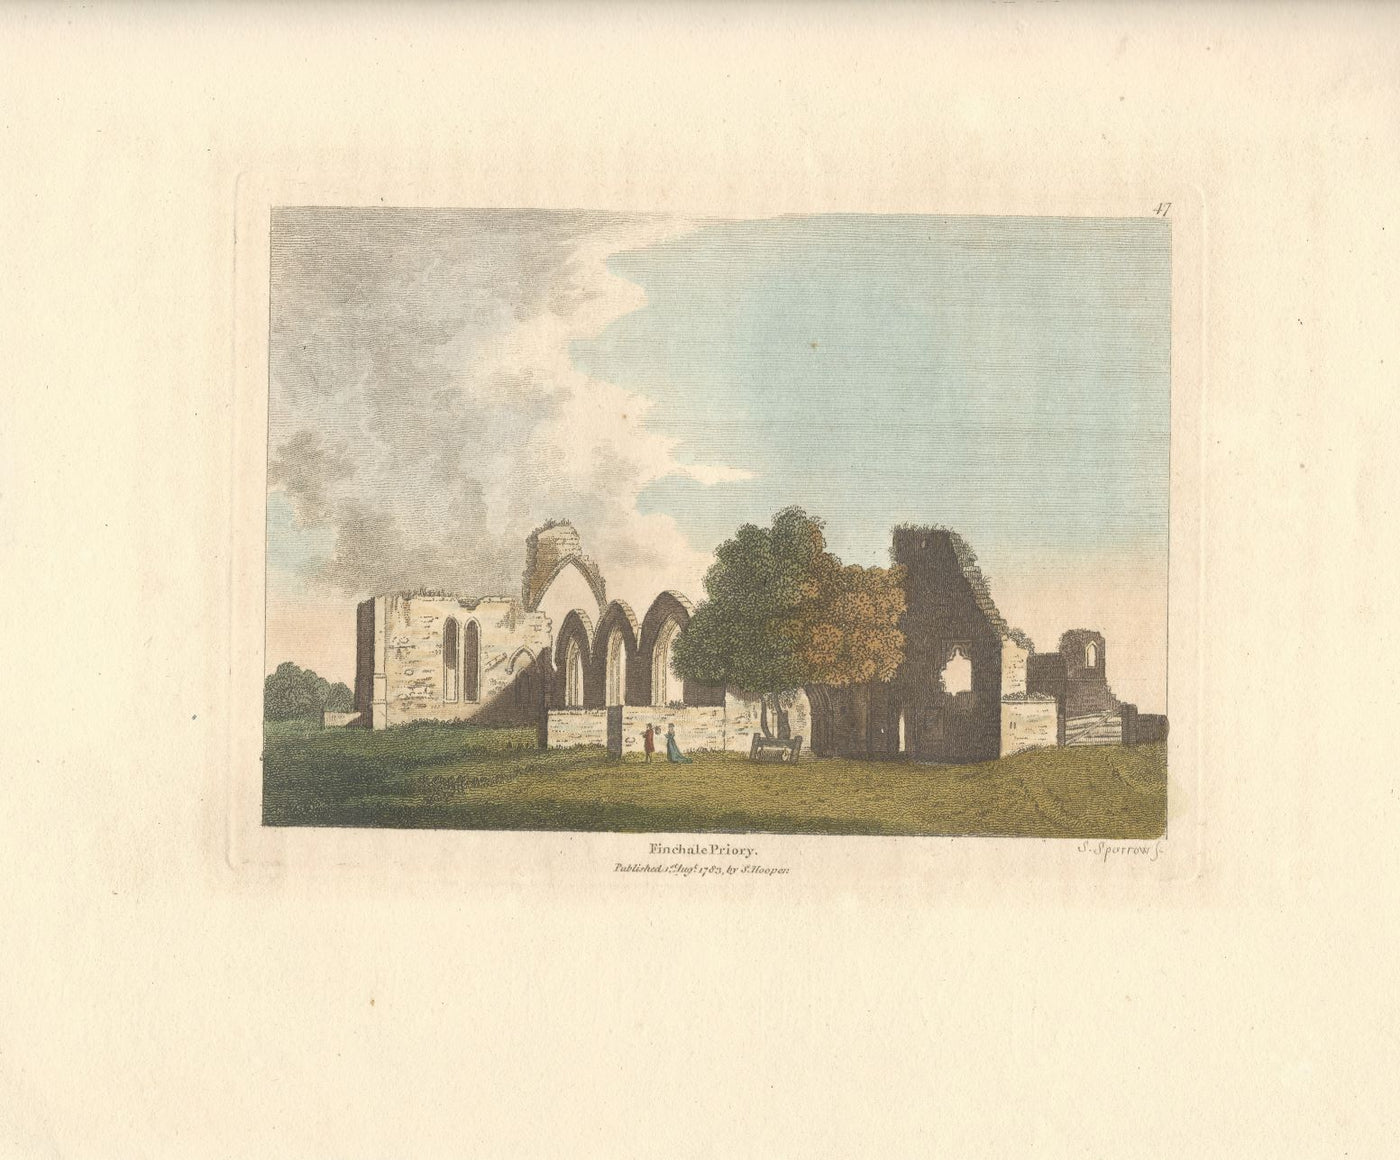 Finchale Priory or Abbey County Durham antique print 1783